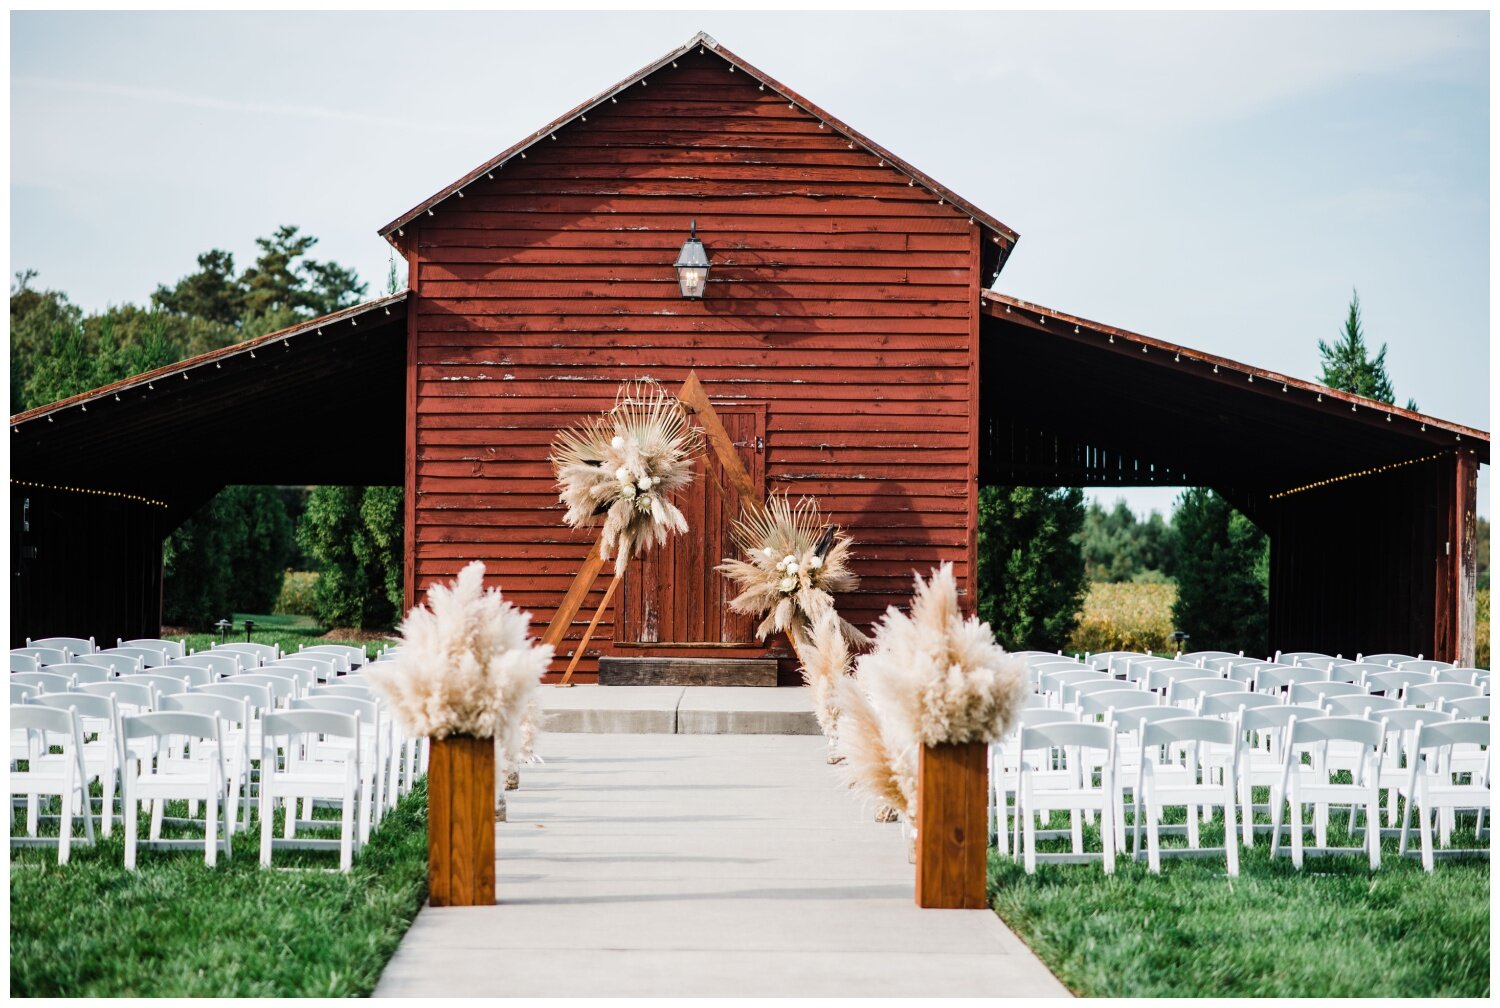 The Barns of Kanak wedding venue ceremony in front of barn